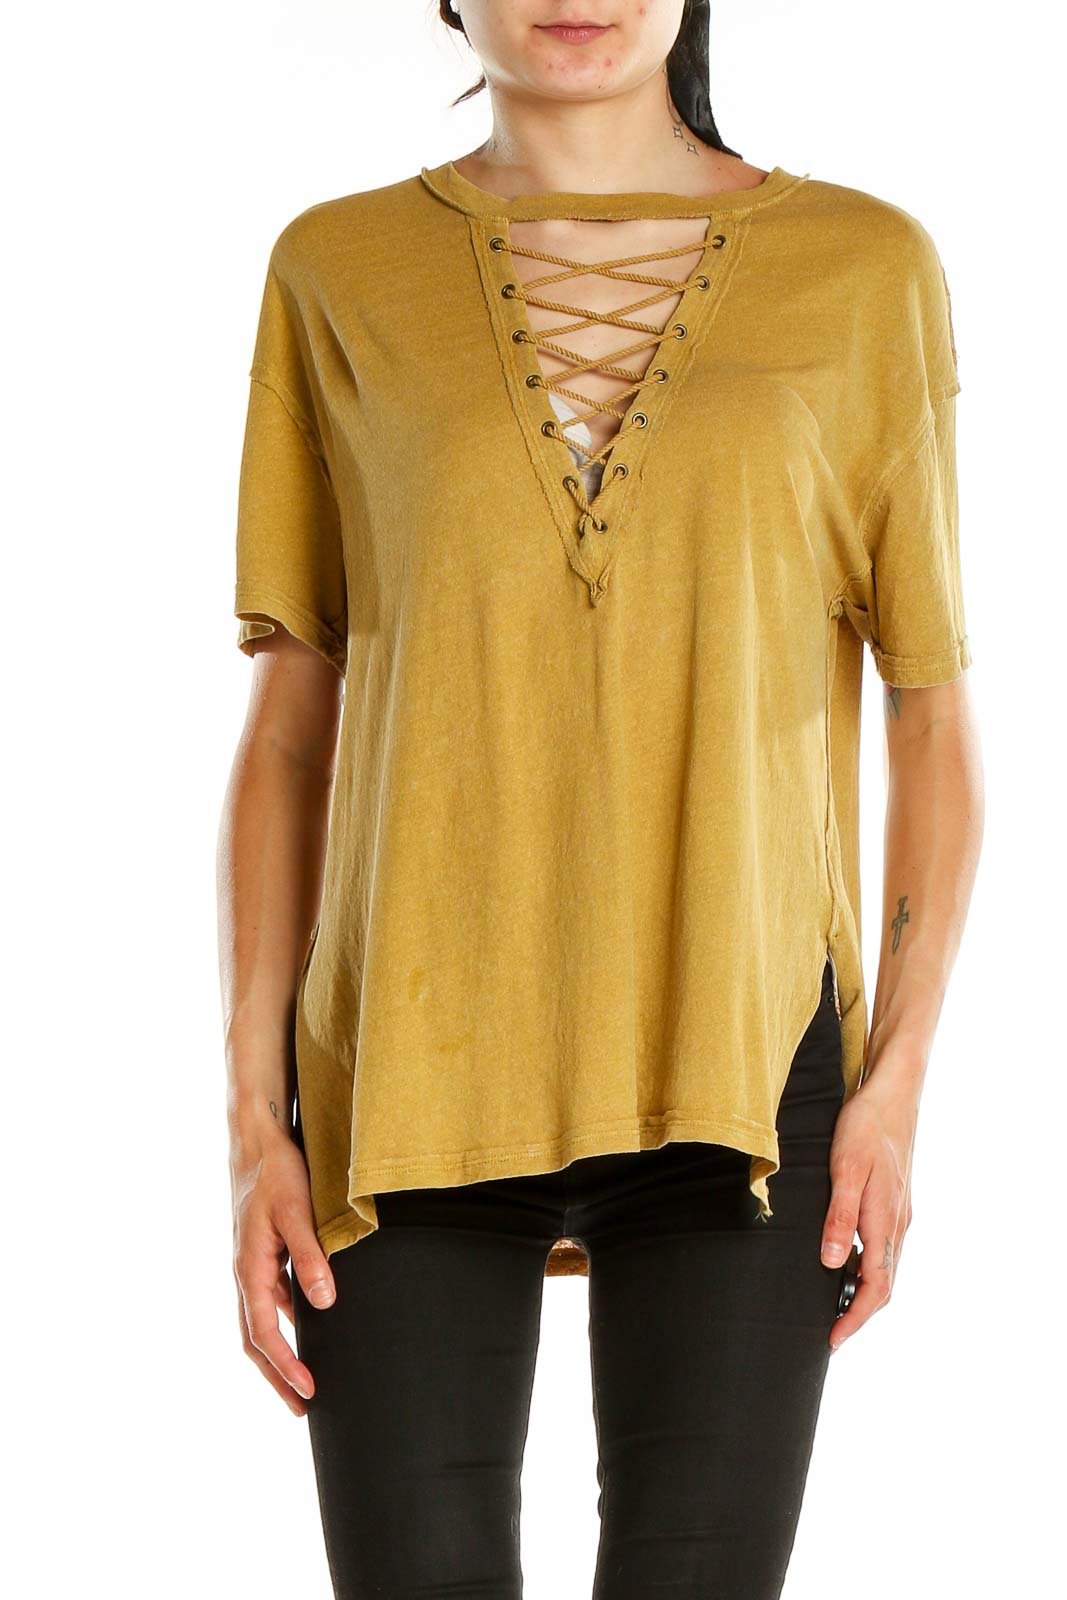 Yellow Lace Up Shirt Front